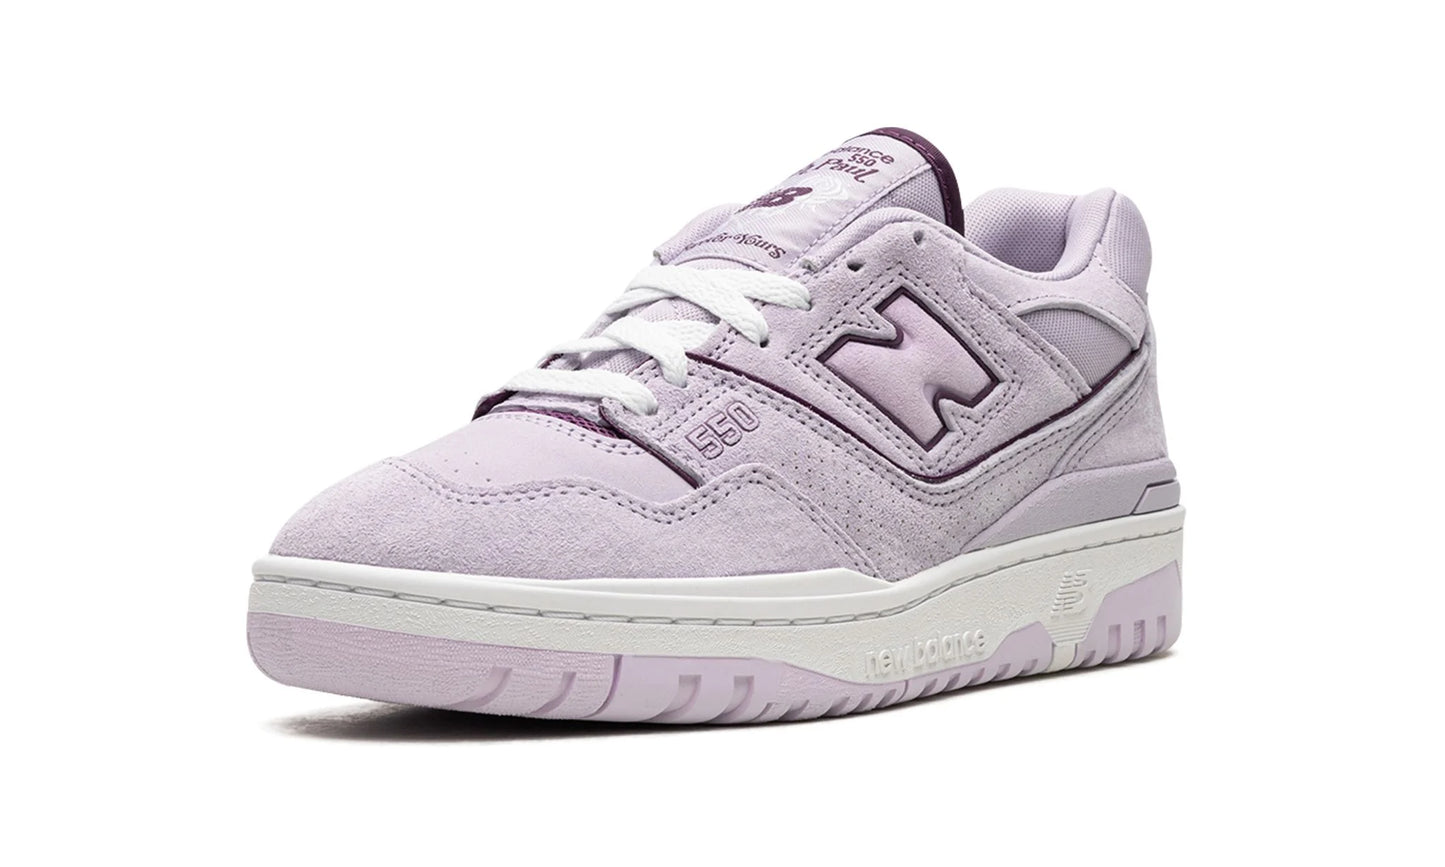 New Balance 550 “Forever Yours”